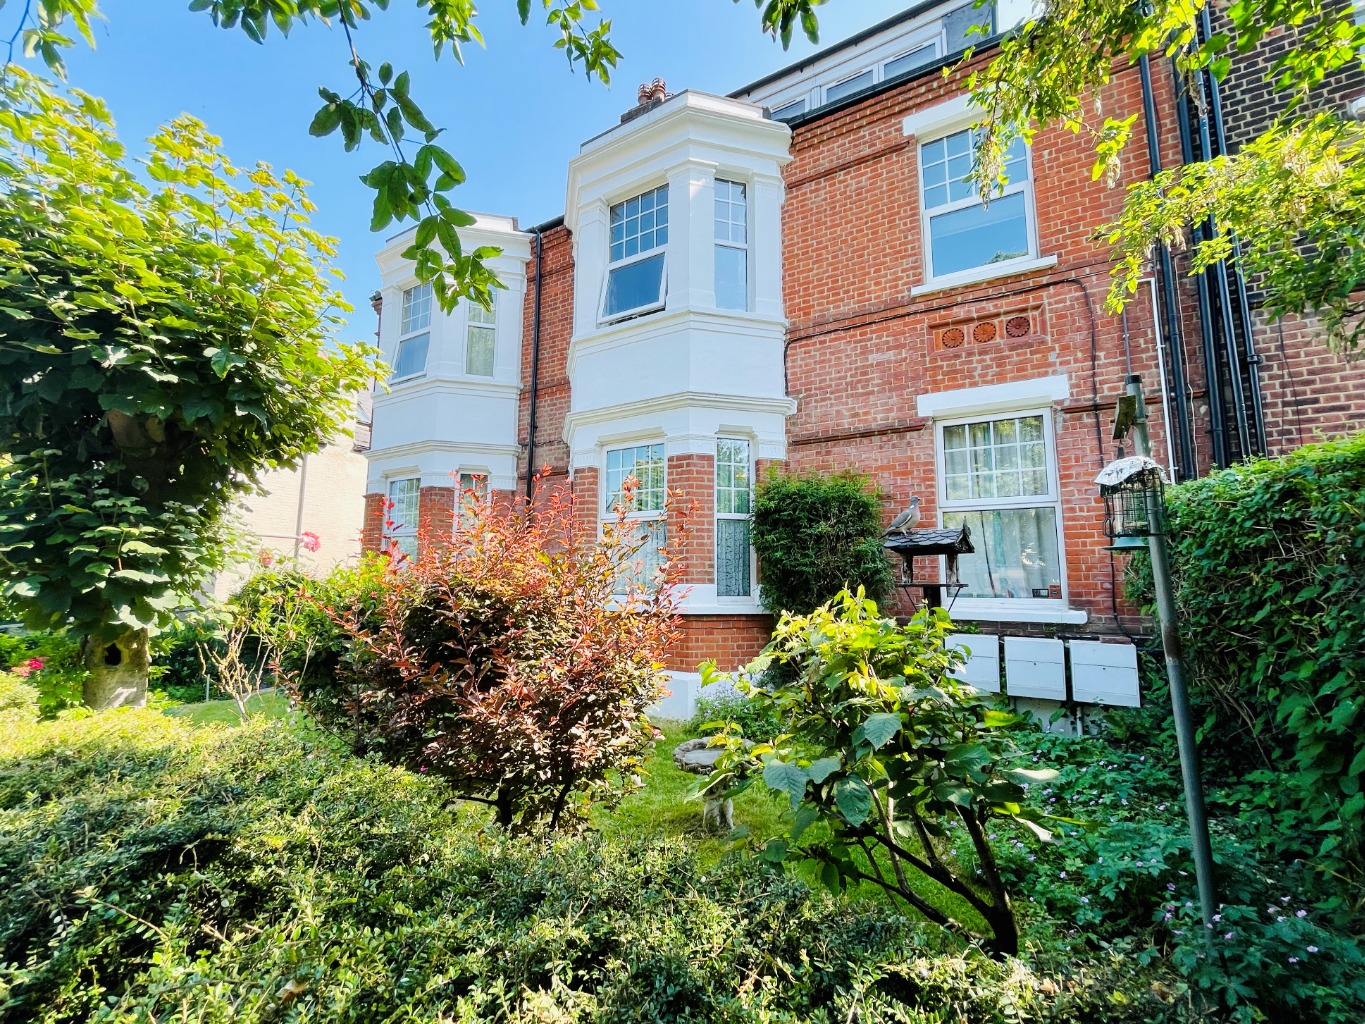 Beaumont Gibbs are pleased to offer this stylish and well presented two bedroomed flat for sale